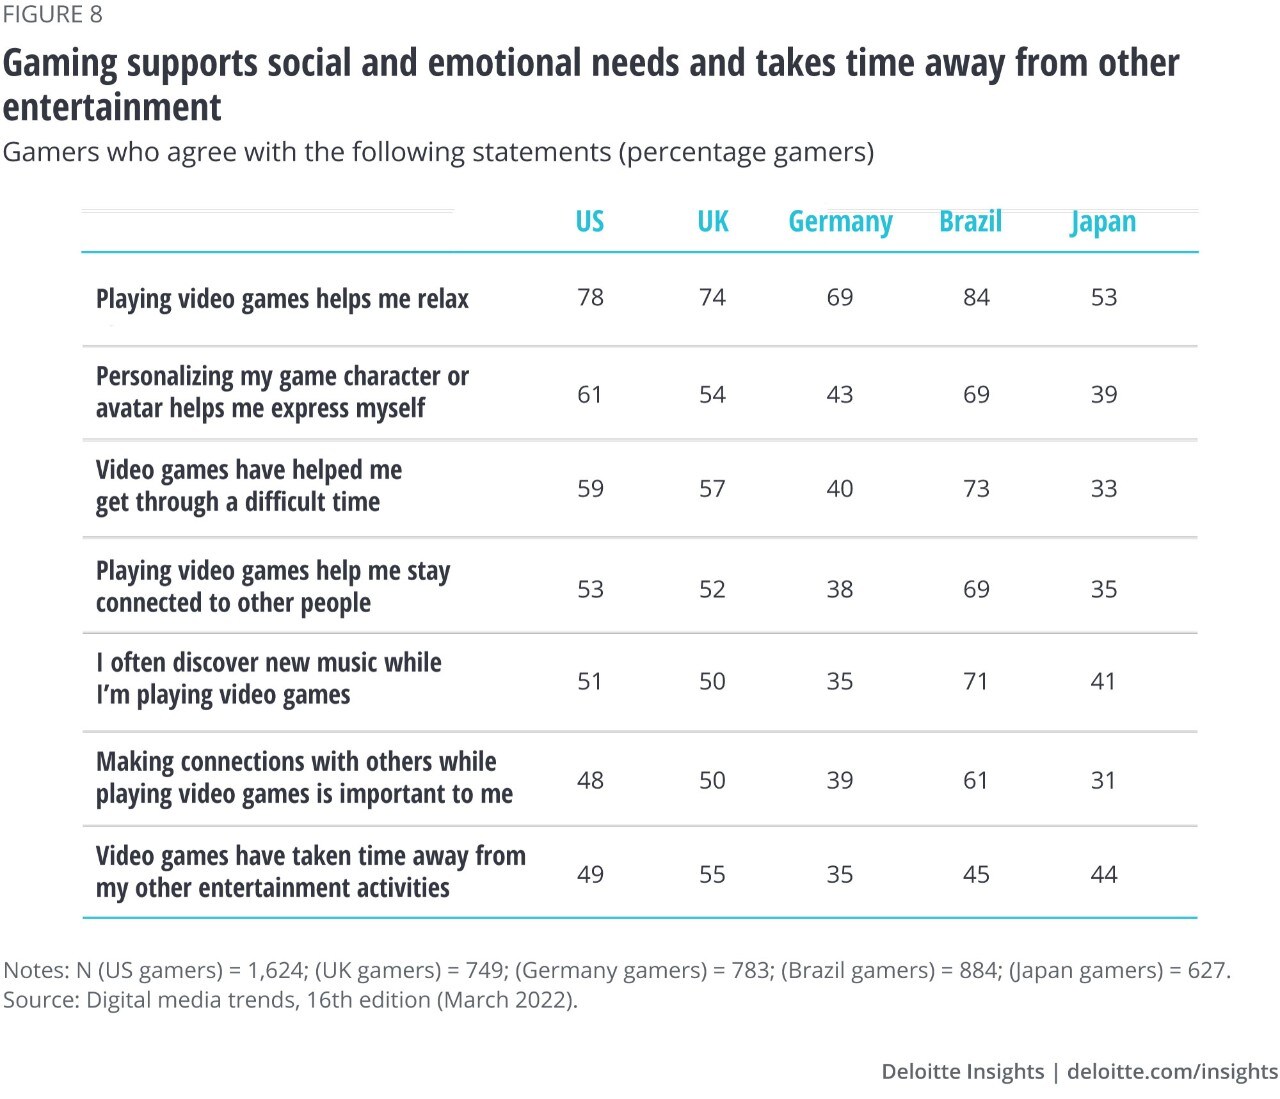 Figure 8. Gaming supports social and emotional needs, and takes time away from other entertainment